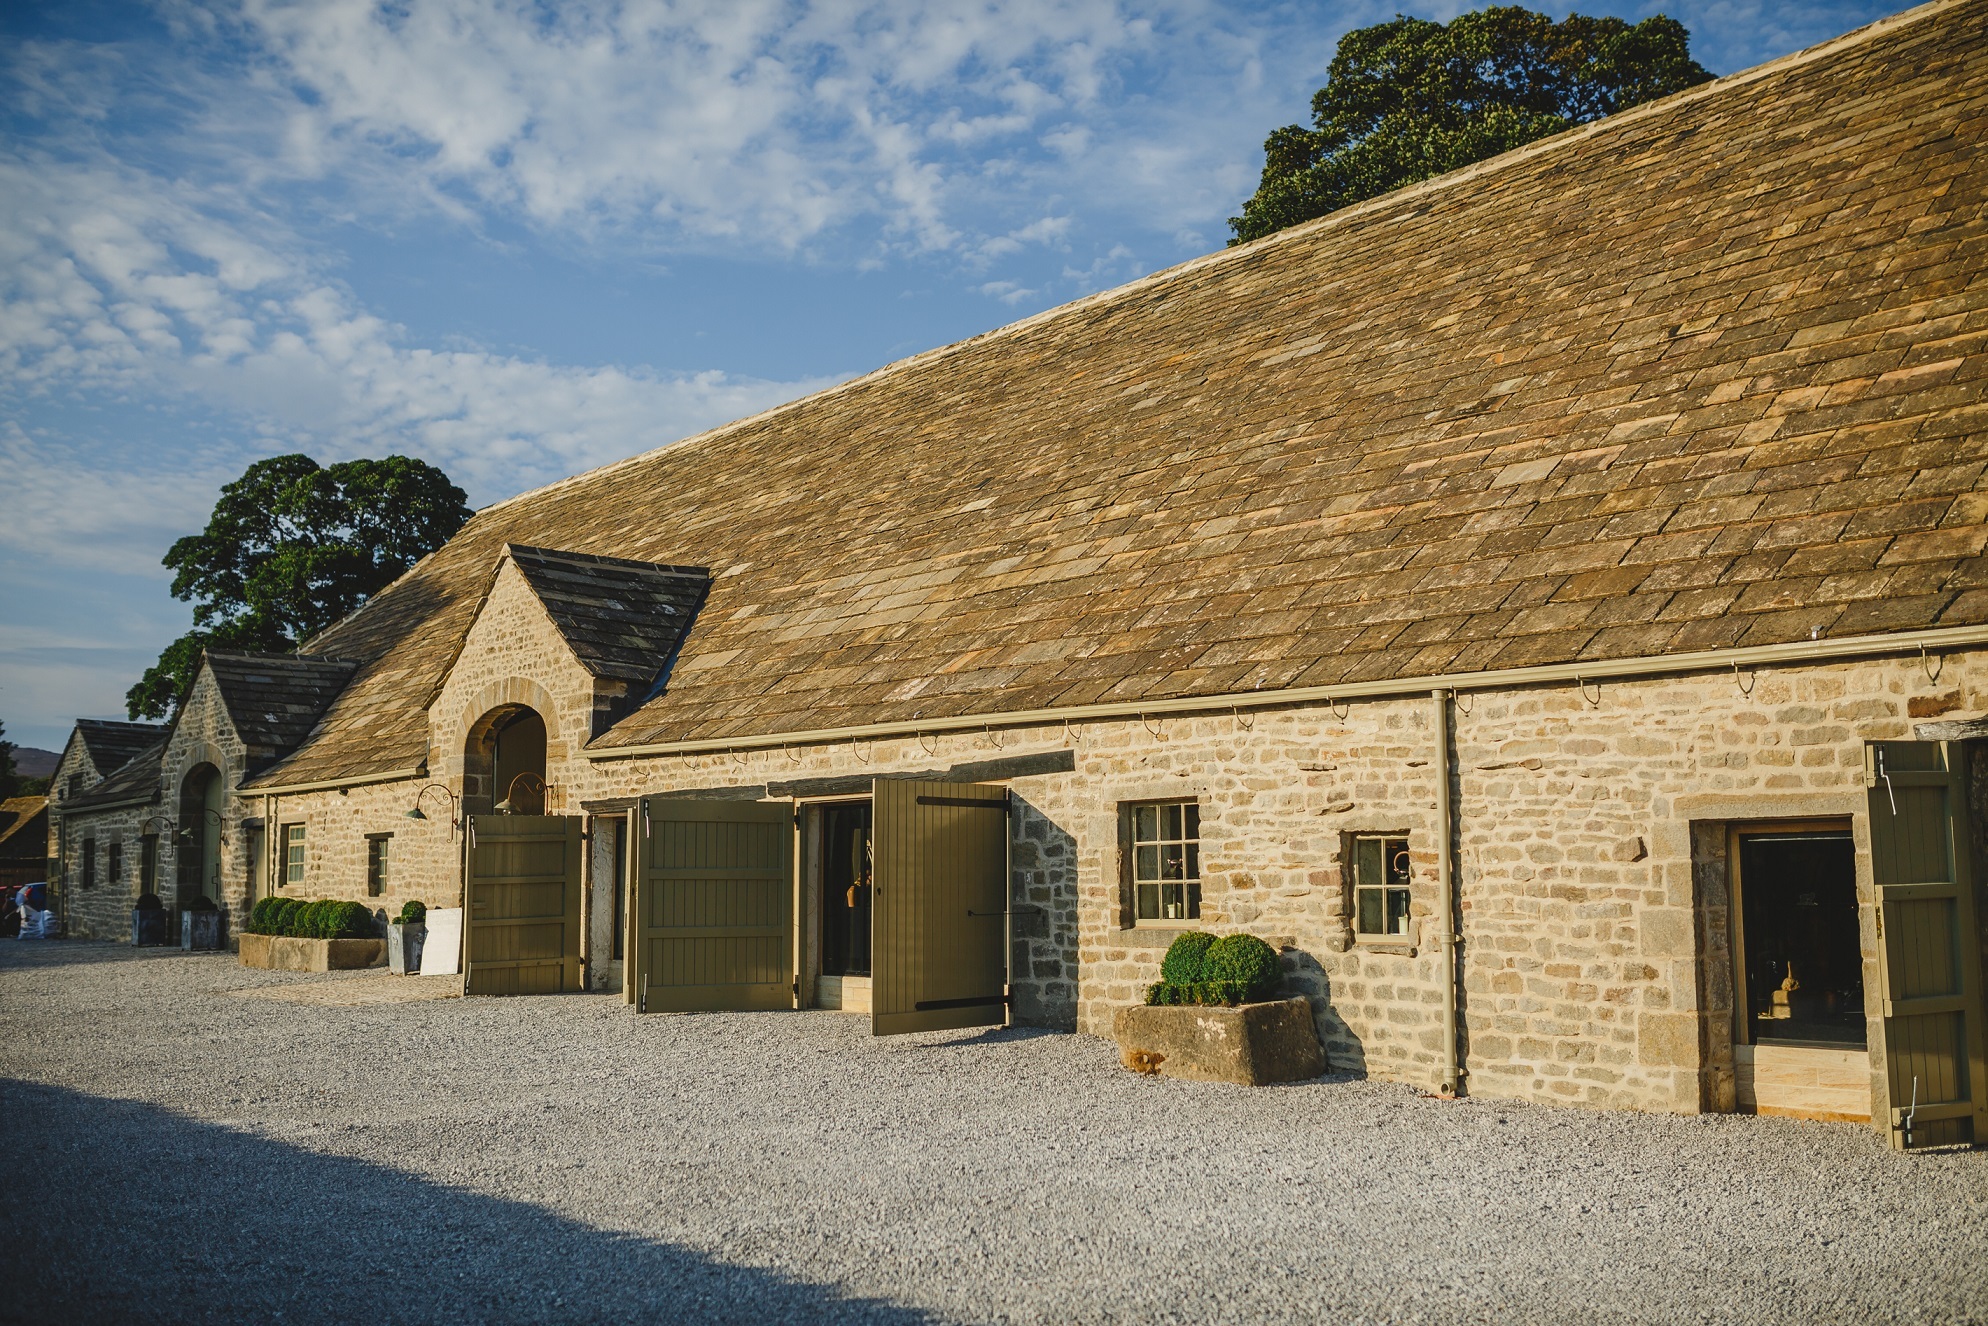 Wedding venue is named best commercial build in the UK